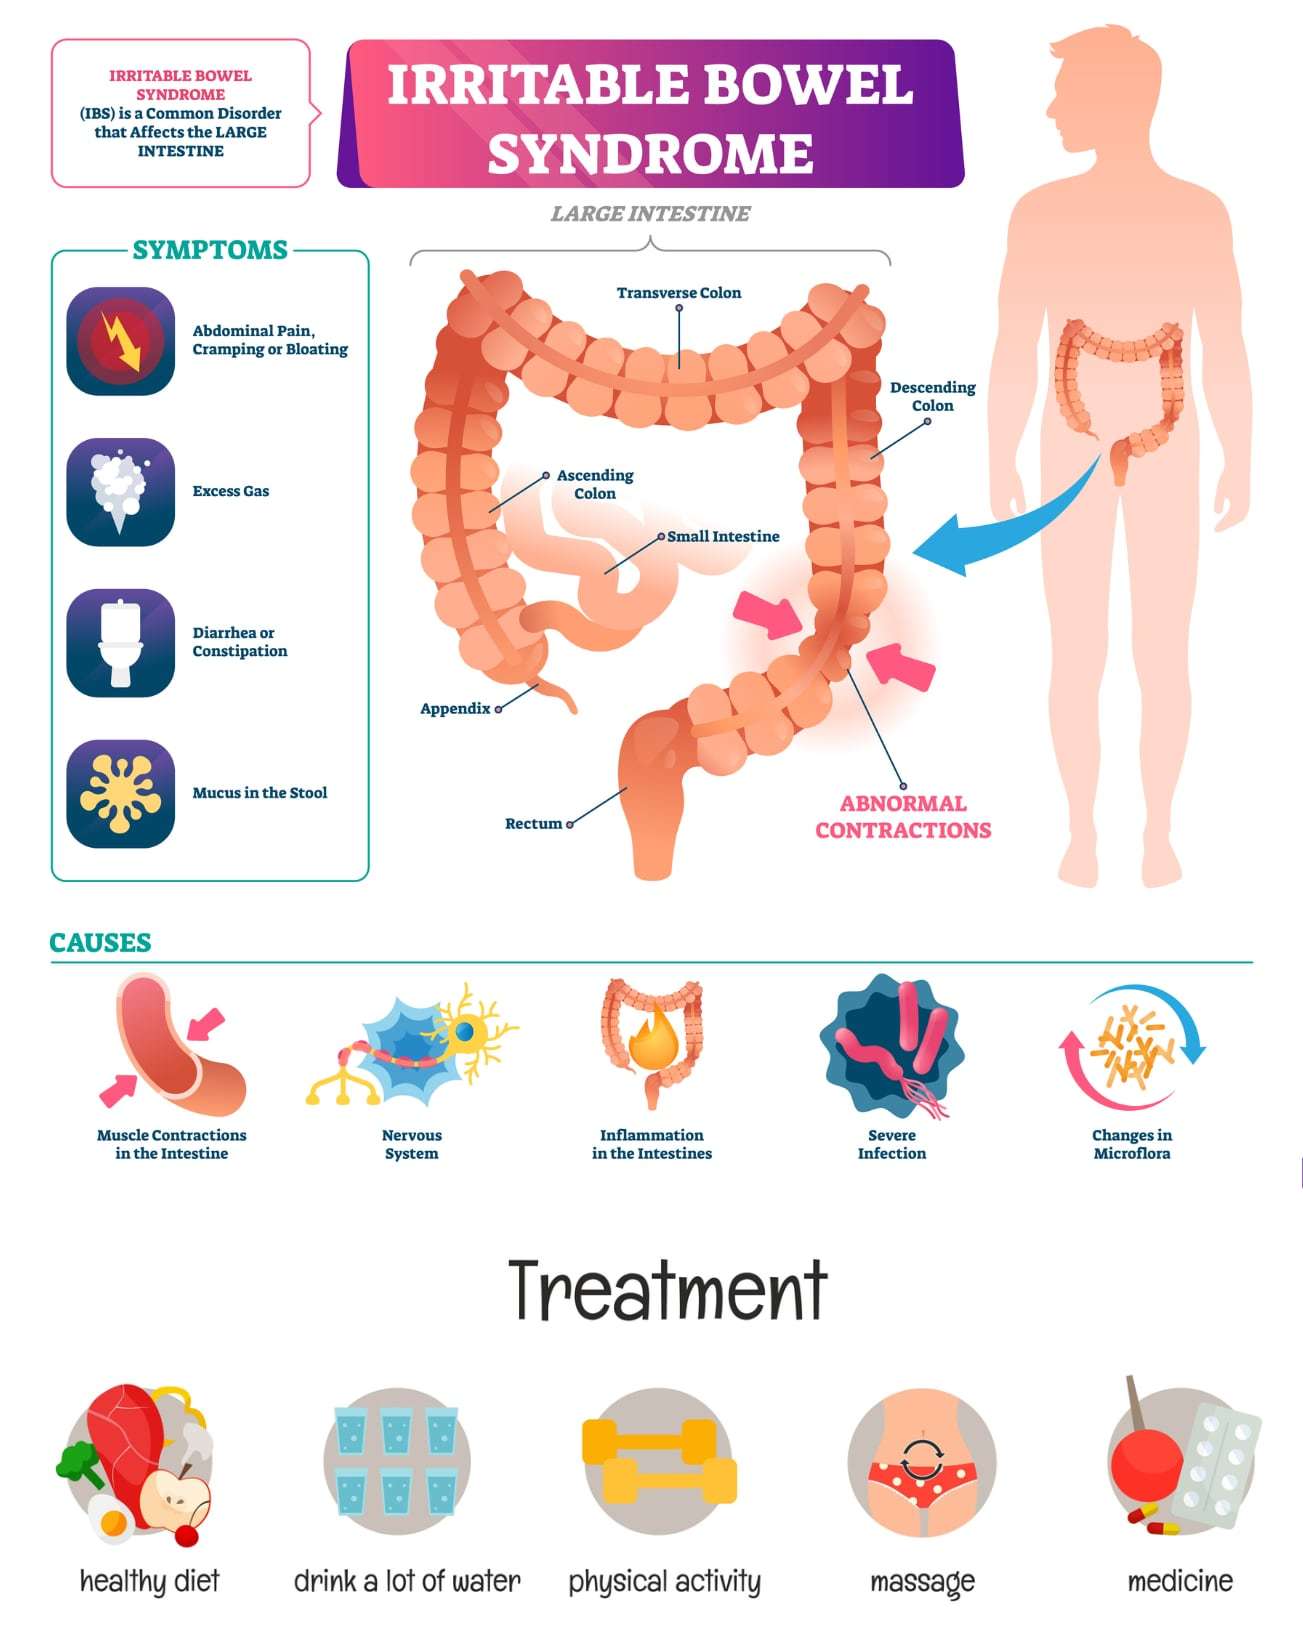 Changes in Bowel Habits: What Is It, Symptoms, and More